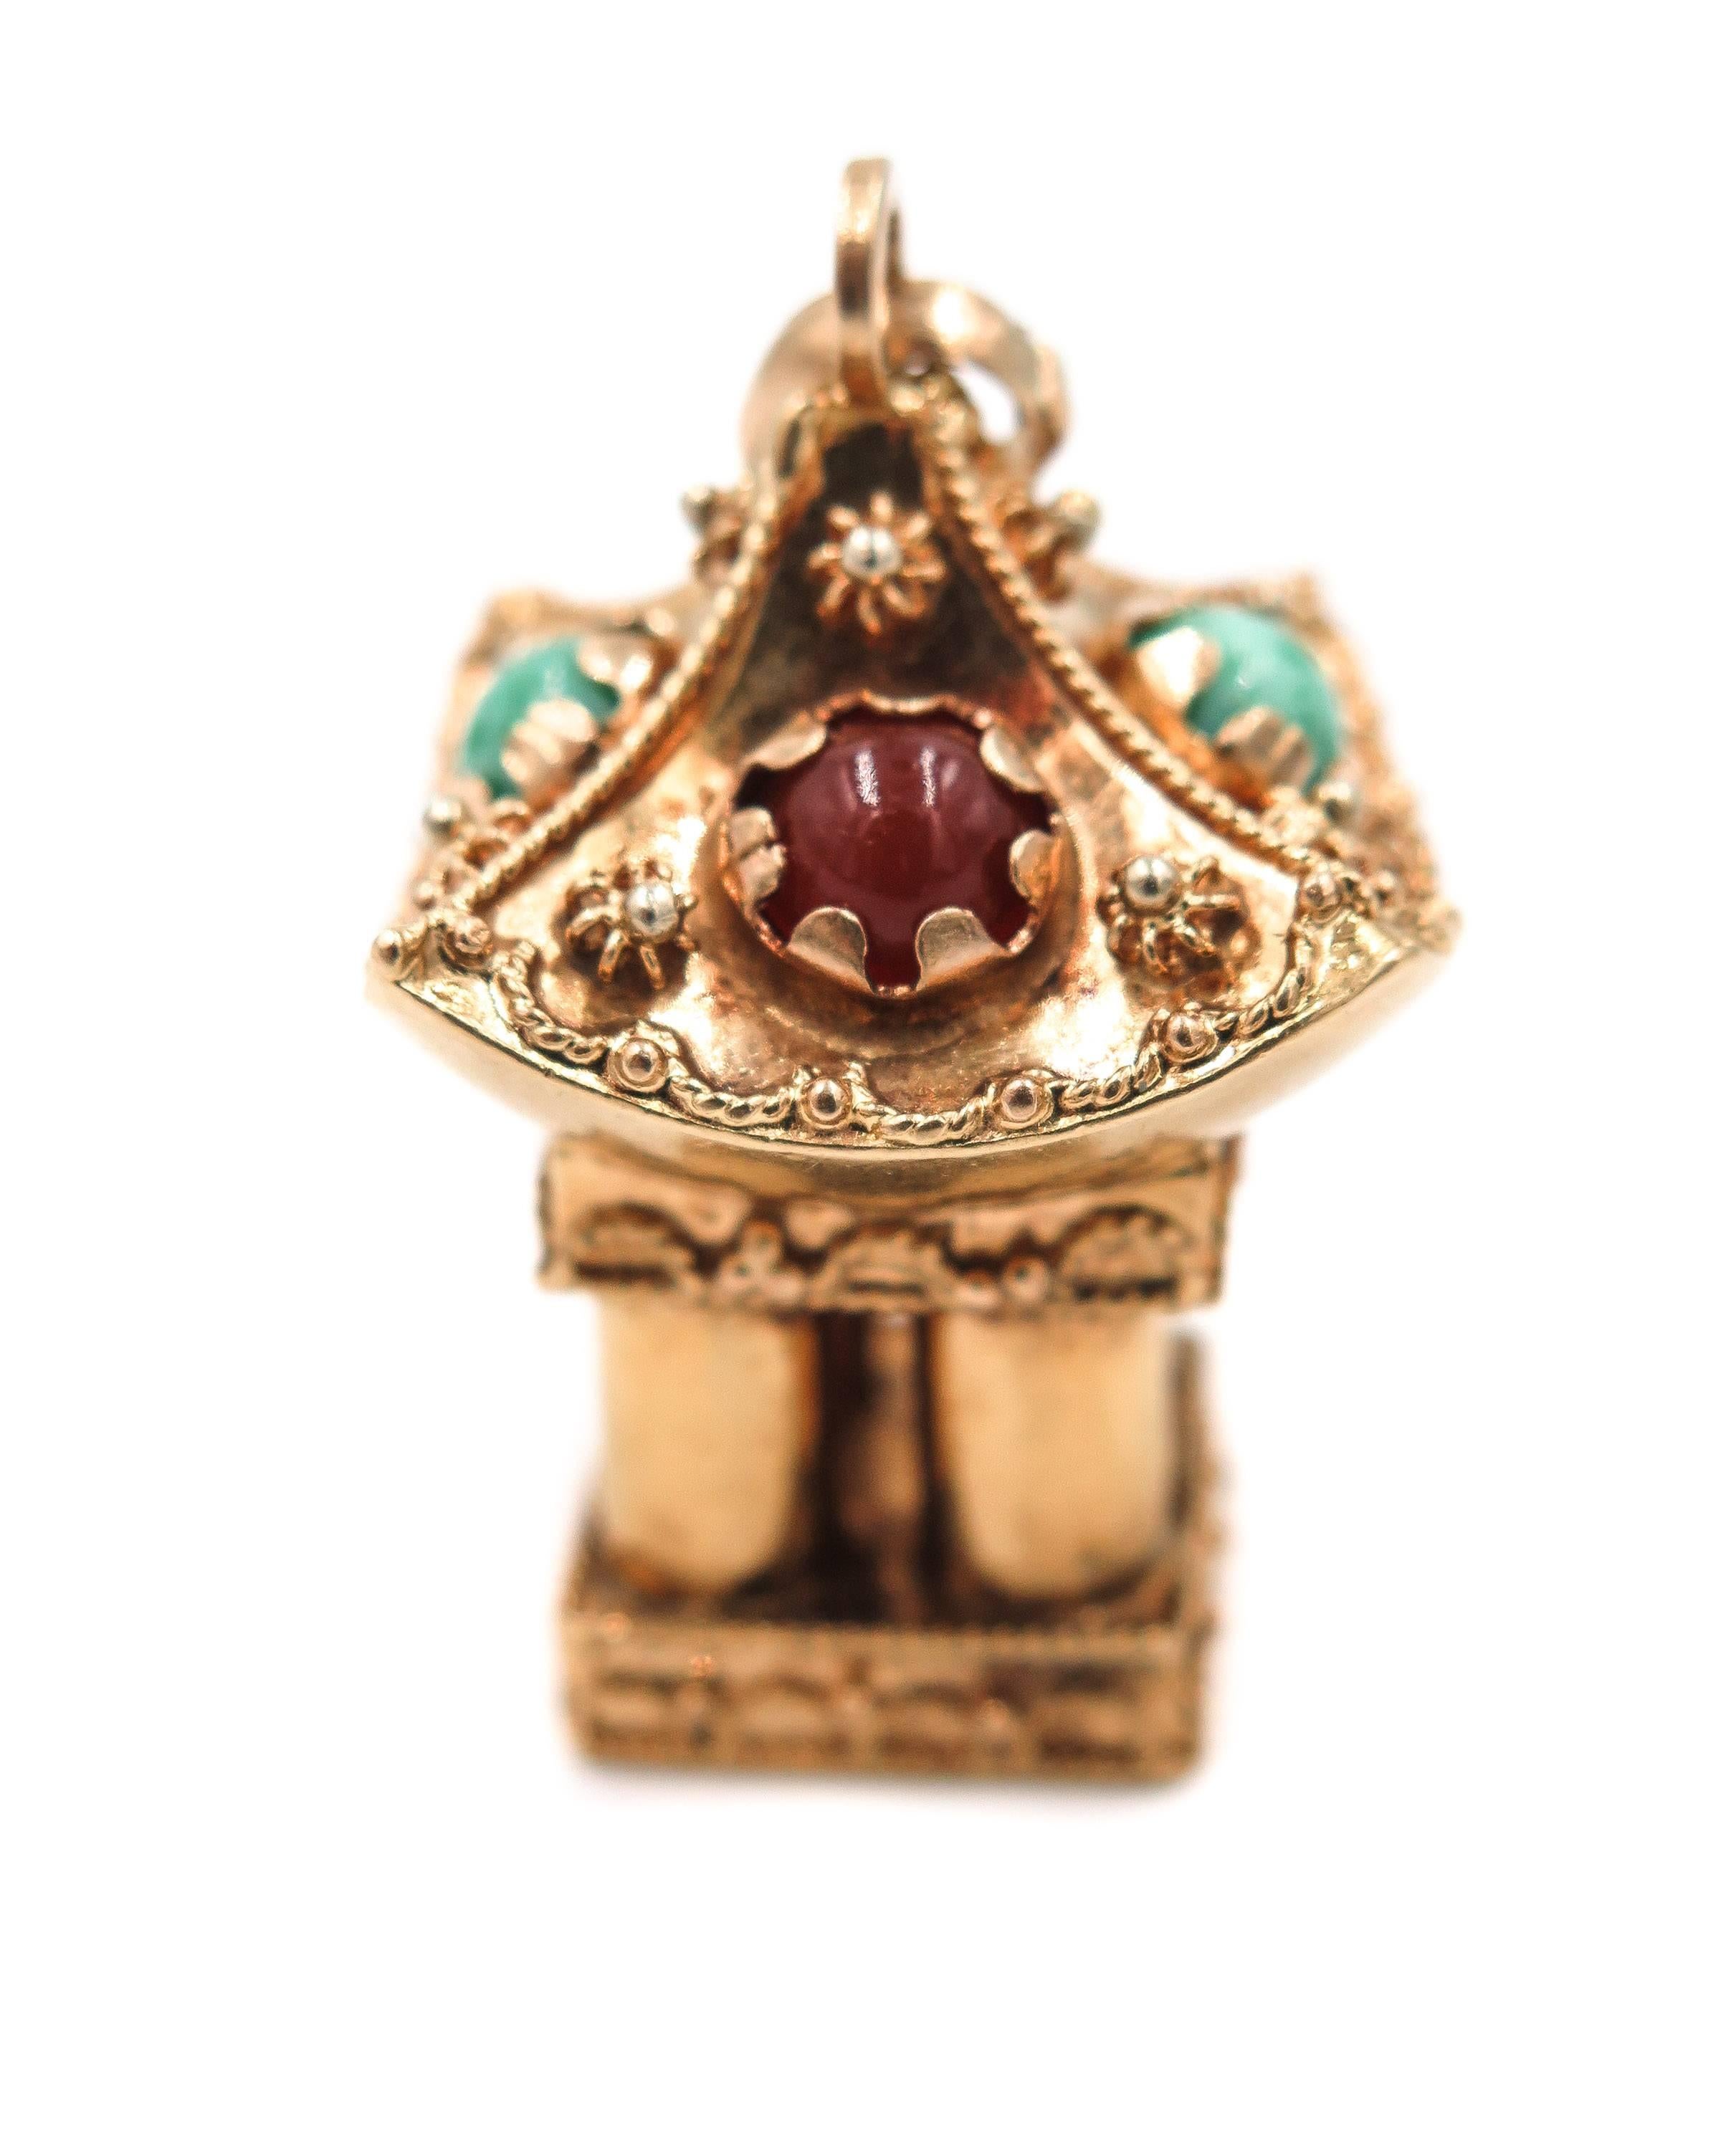 Vintage Etruscan Style Pagoda Charm, handcrafted in Italy with 18k yellow gold adorned with cabochon turquoise and carnelians.
Exceptional design and craftsmanship, a real treasure to keep!!
